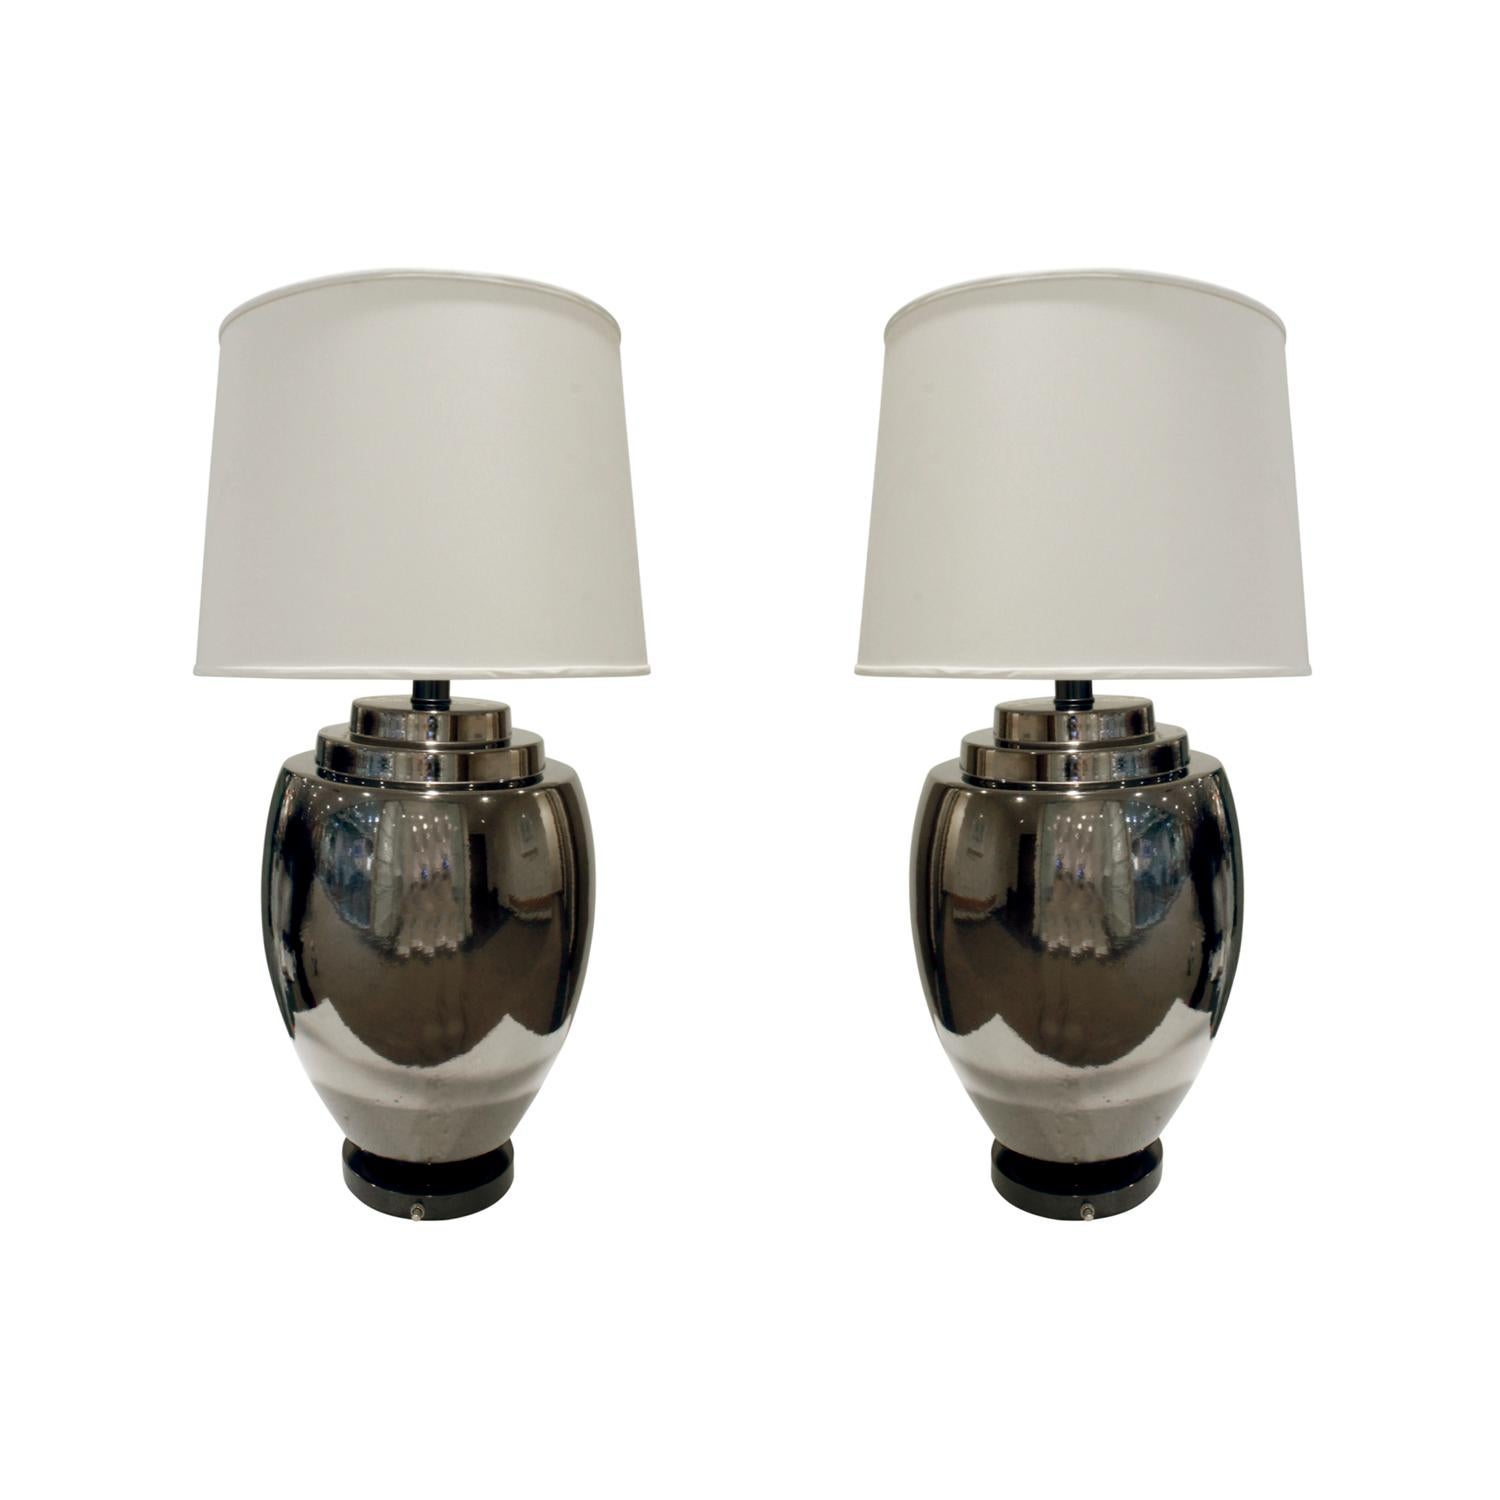 Pair of Chic Ceramic Table Lamps with Gunmetal Glaze, 1970s